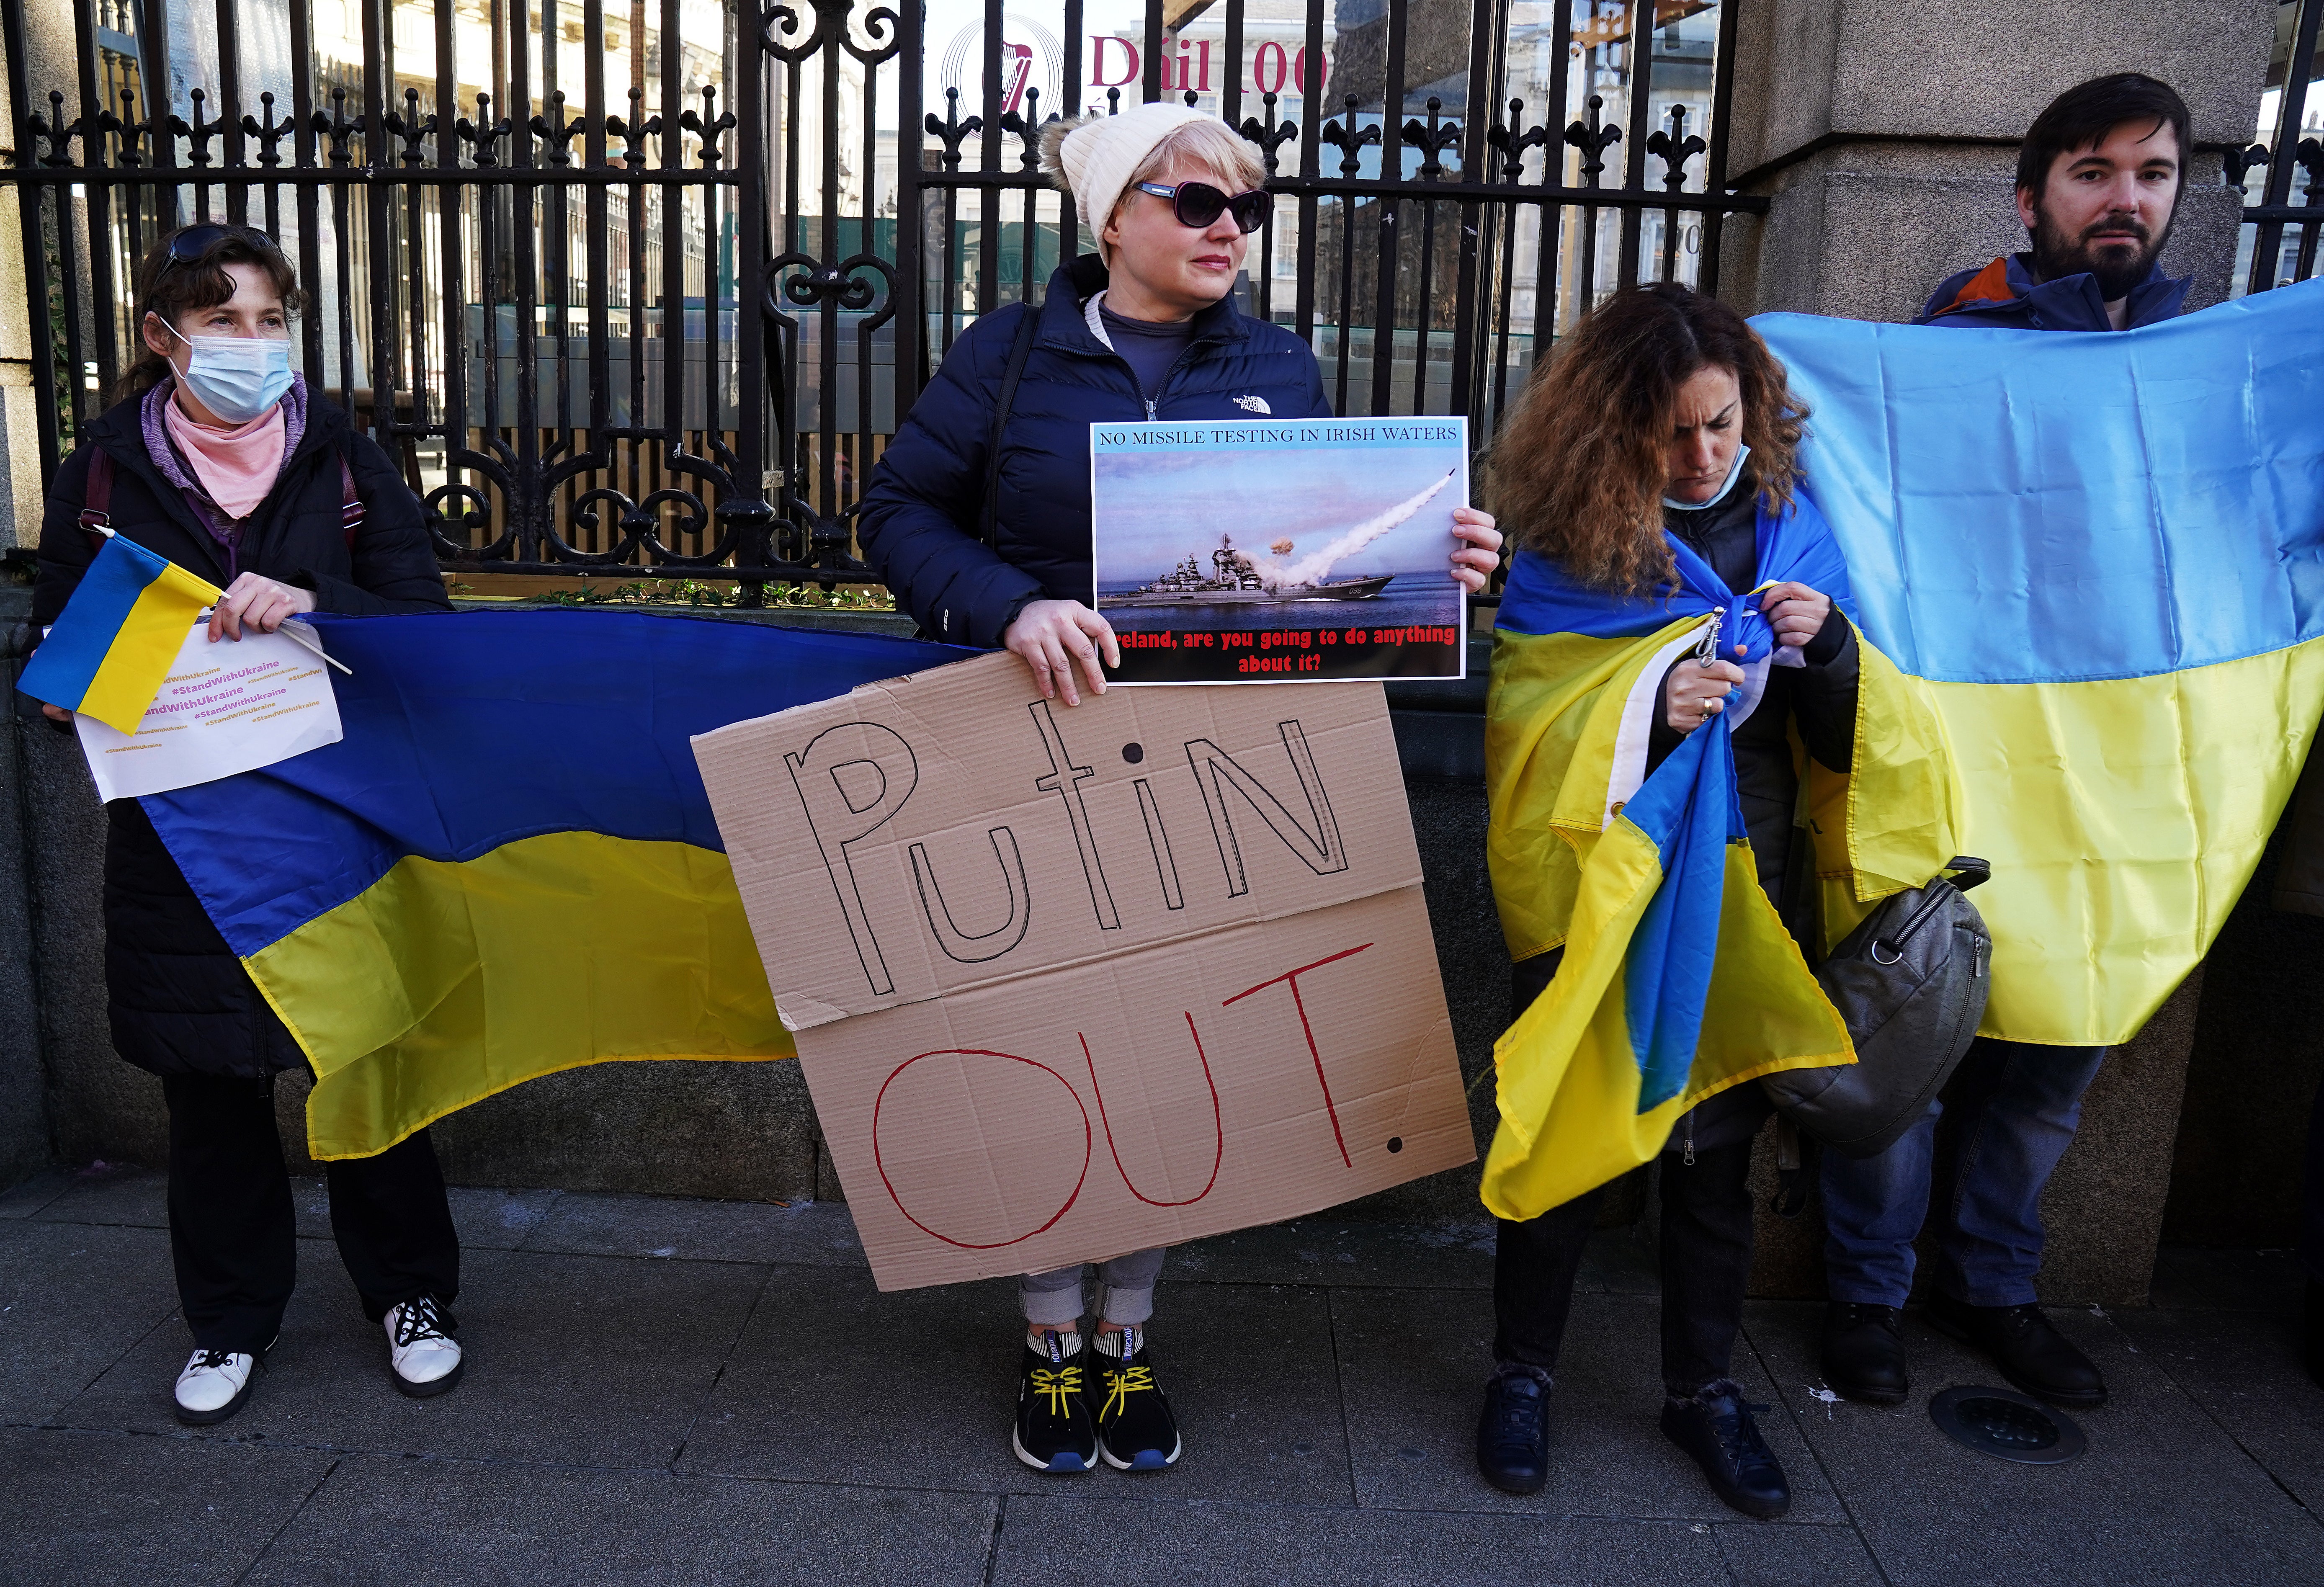 Members of the Ukrainian community attend a rally at Leinster House, Dublin (Brian Lawless/PA)